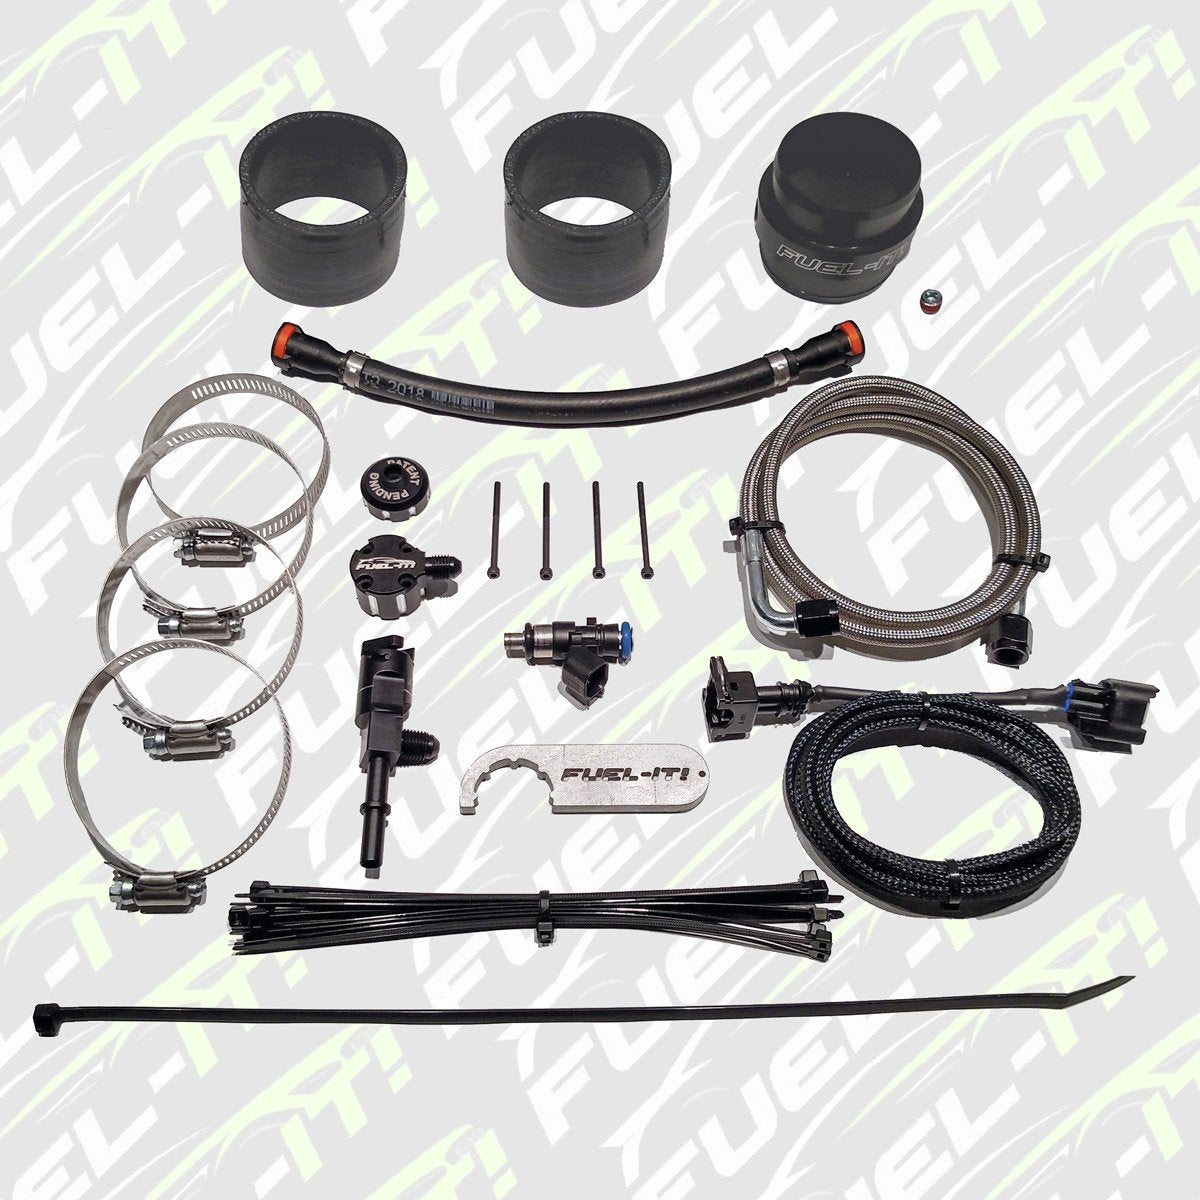 Fuel-It - B58 CHARGE PIPE INJECTION (CPI) KIT - Burger Motorsports 